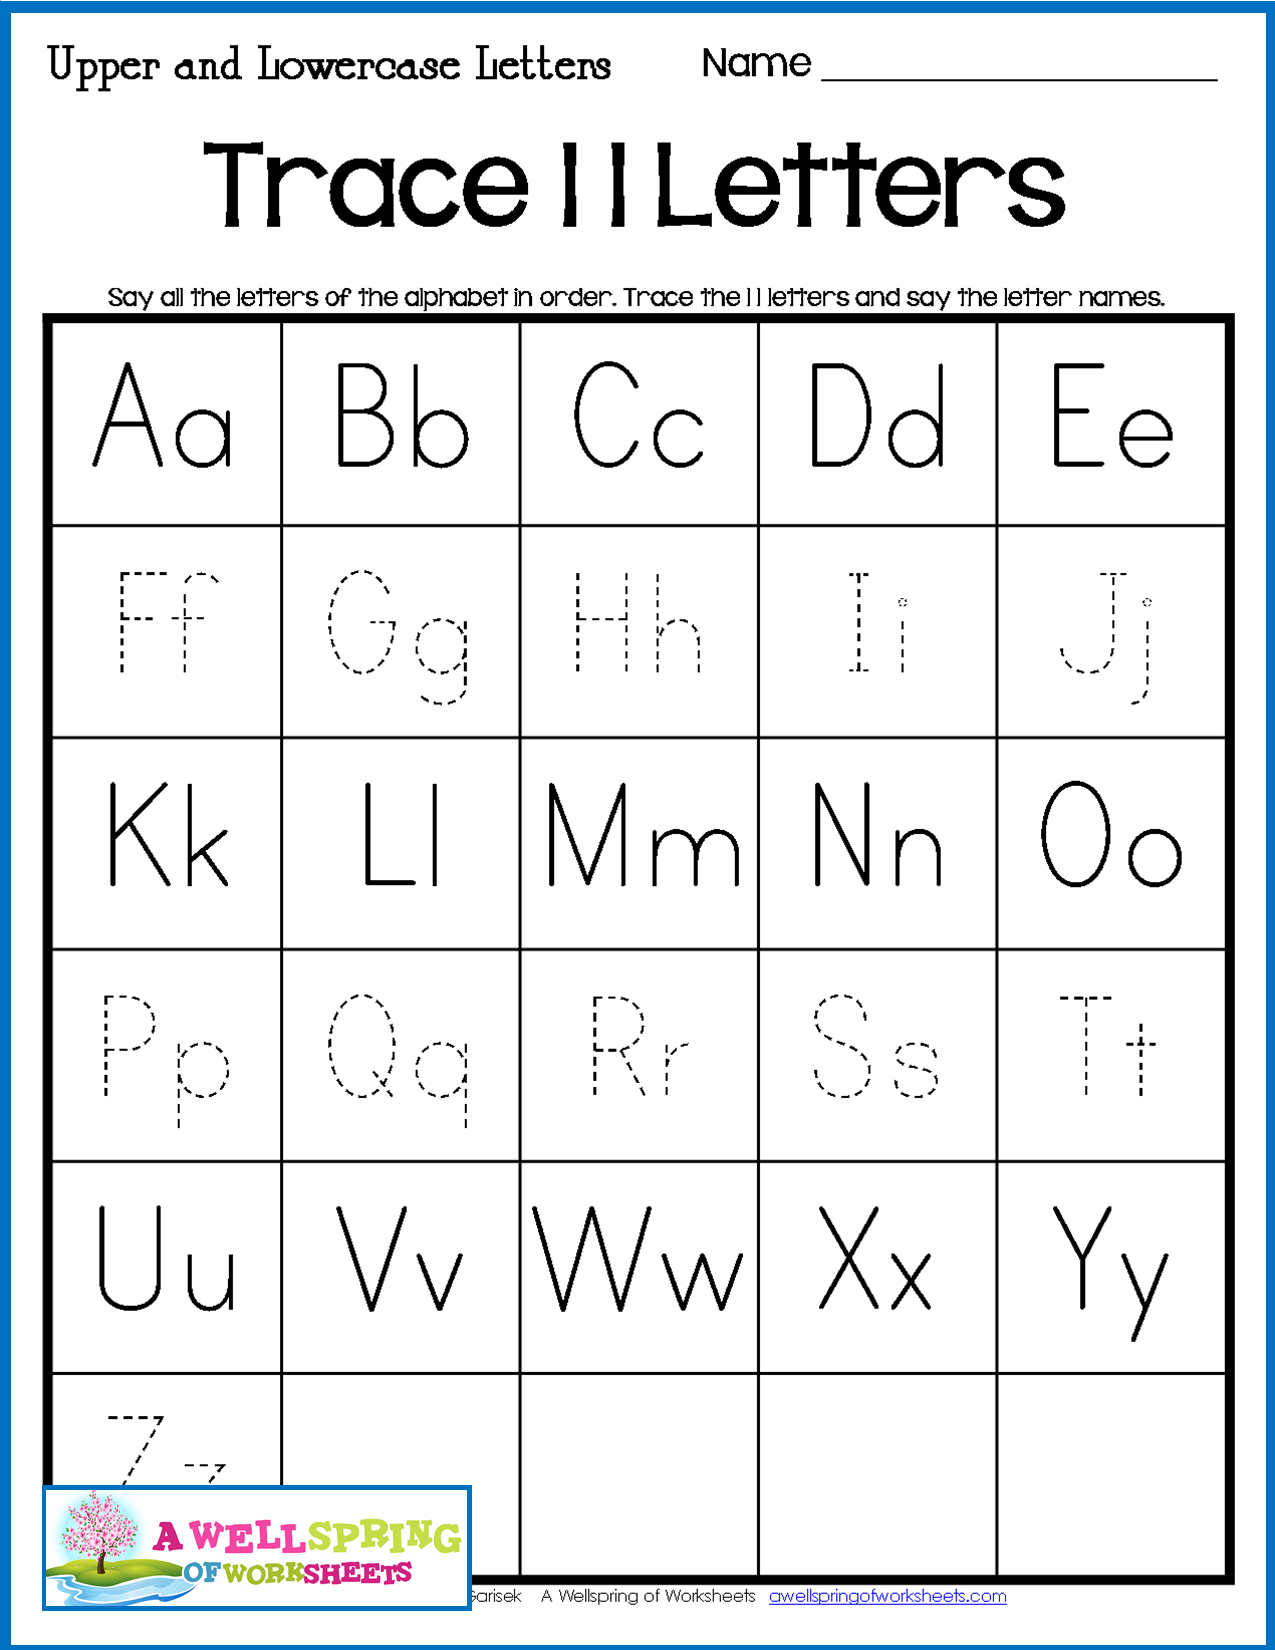 Alphabet Tracing Worksheets - Uppercase &amp;amp; Lowercase Letters pertaining to Upper And Lowercase Letters Tracing Worksheets